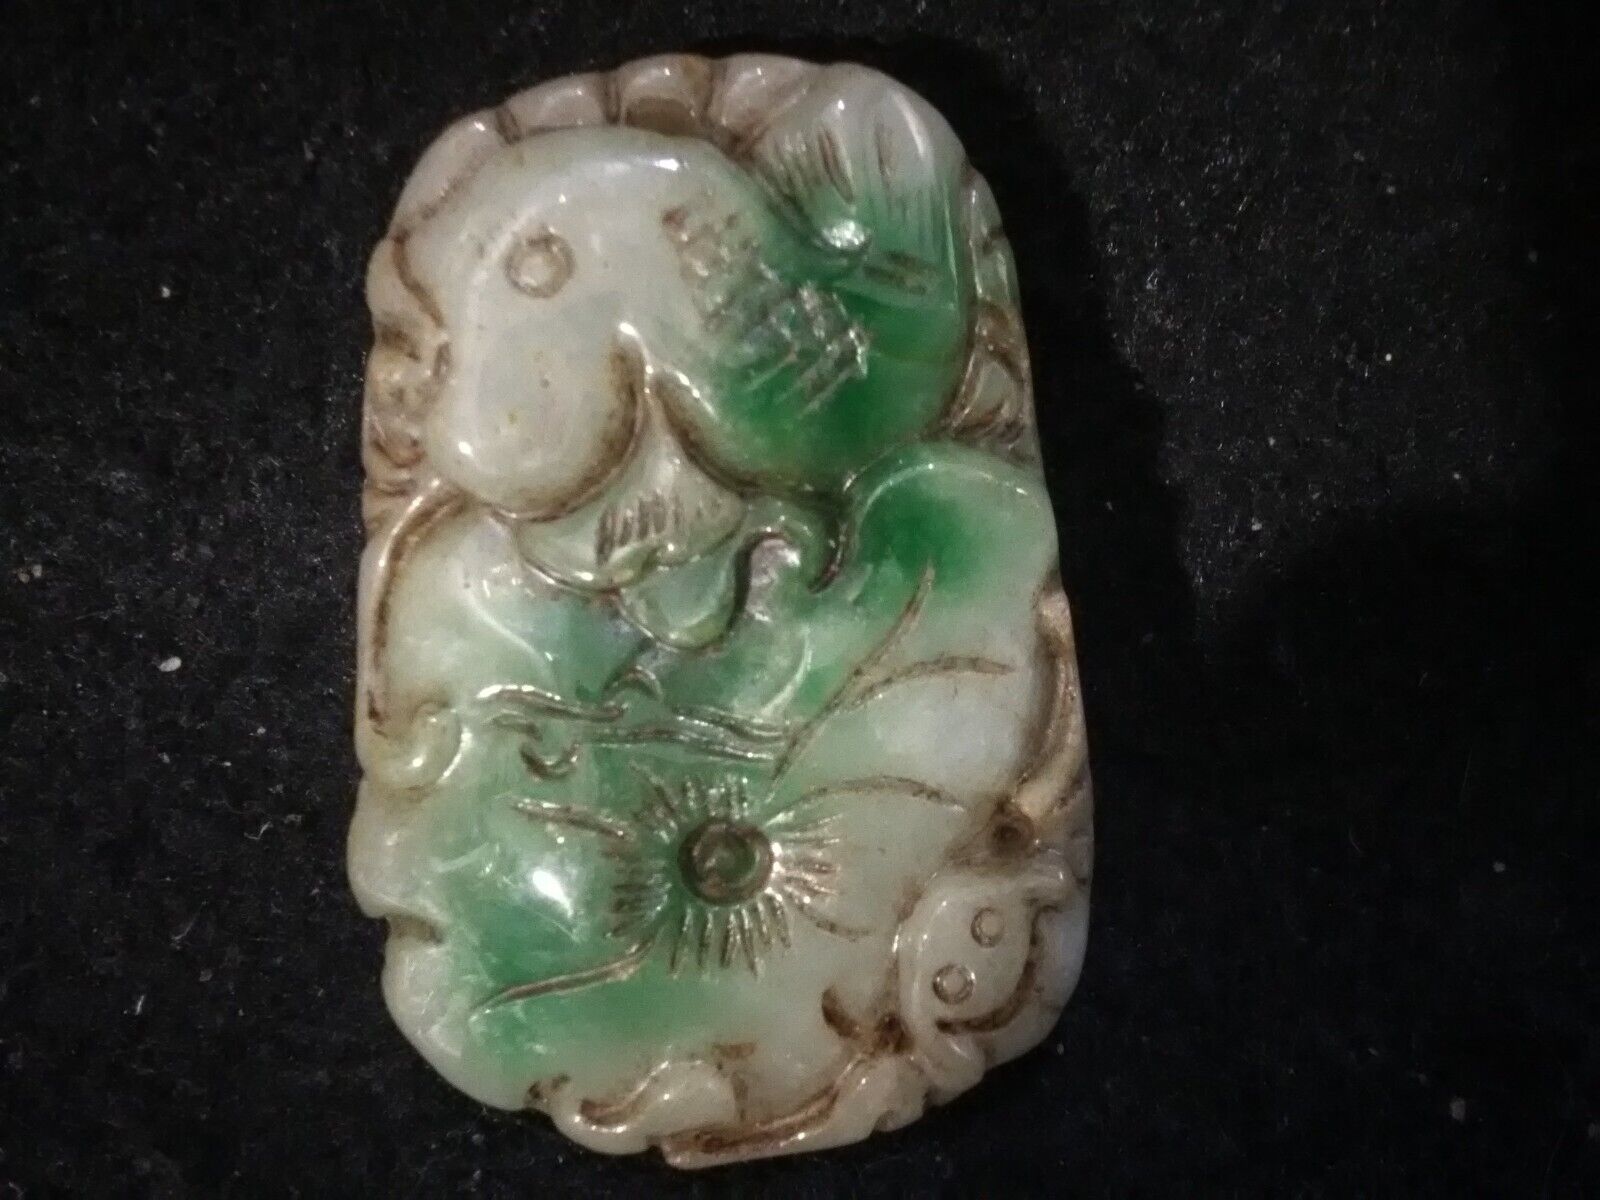 3/17E Ancient Chinese Ming-Qing Dynasty Jadeite Seahorse Amulet 1600-1800 ad